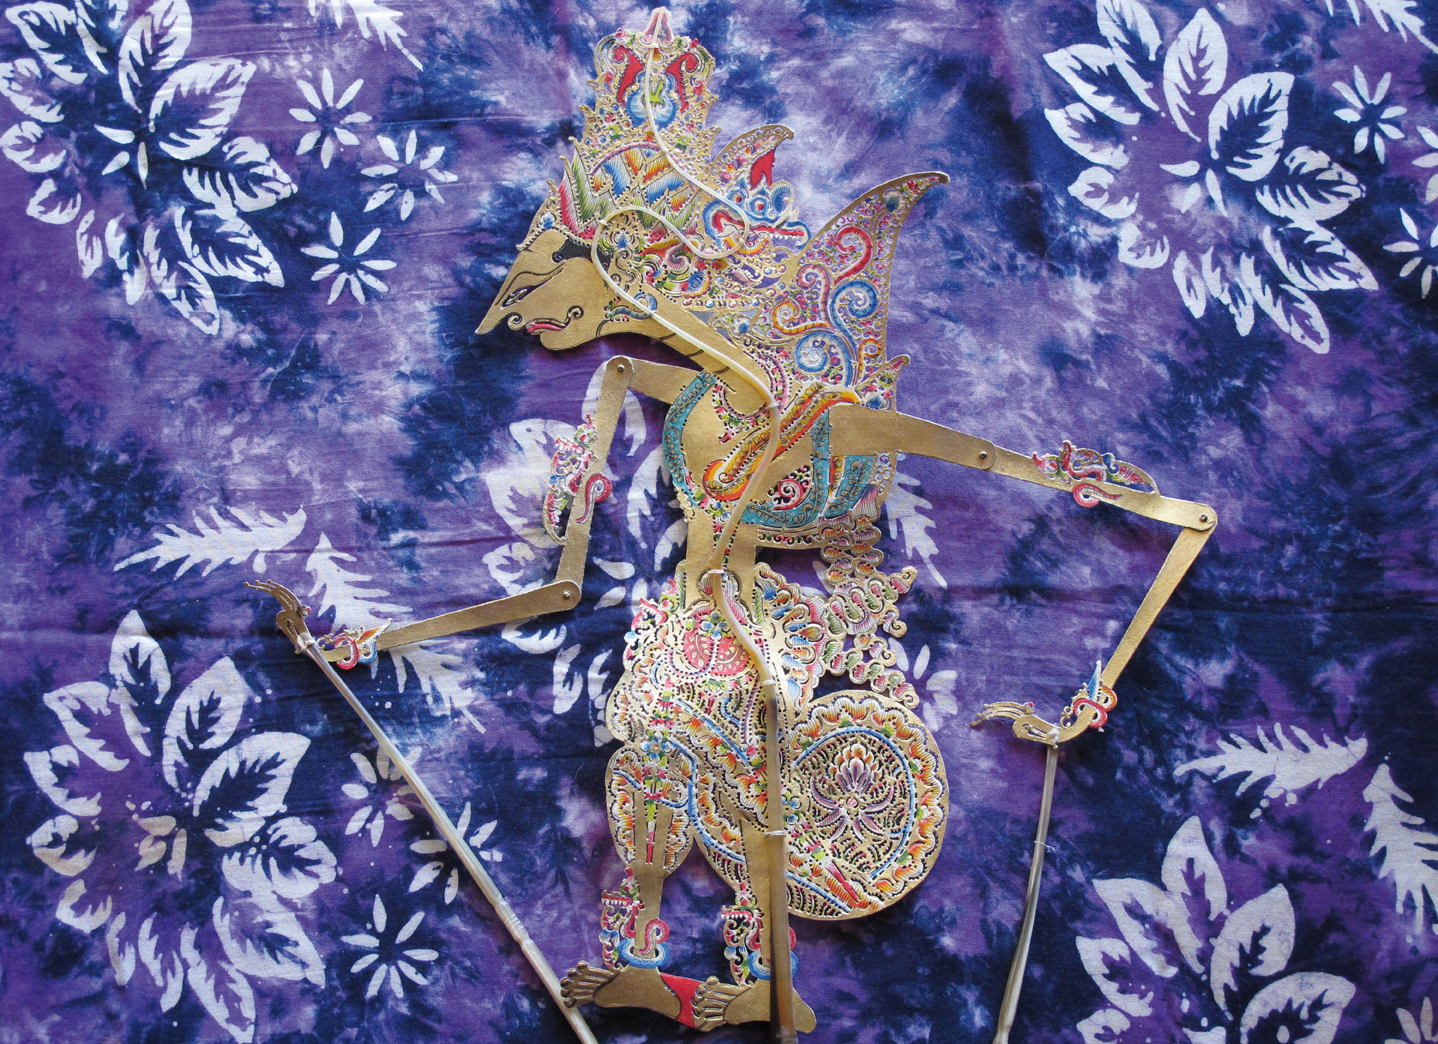 Indonesian shadow puppet